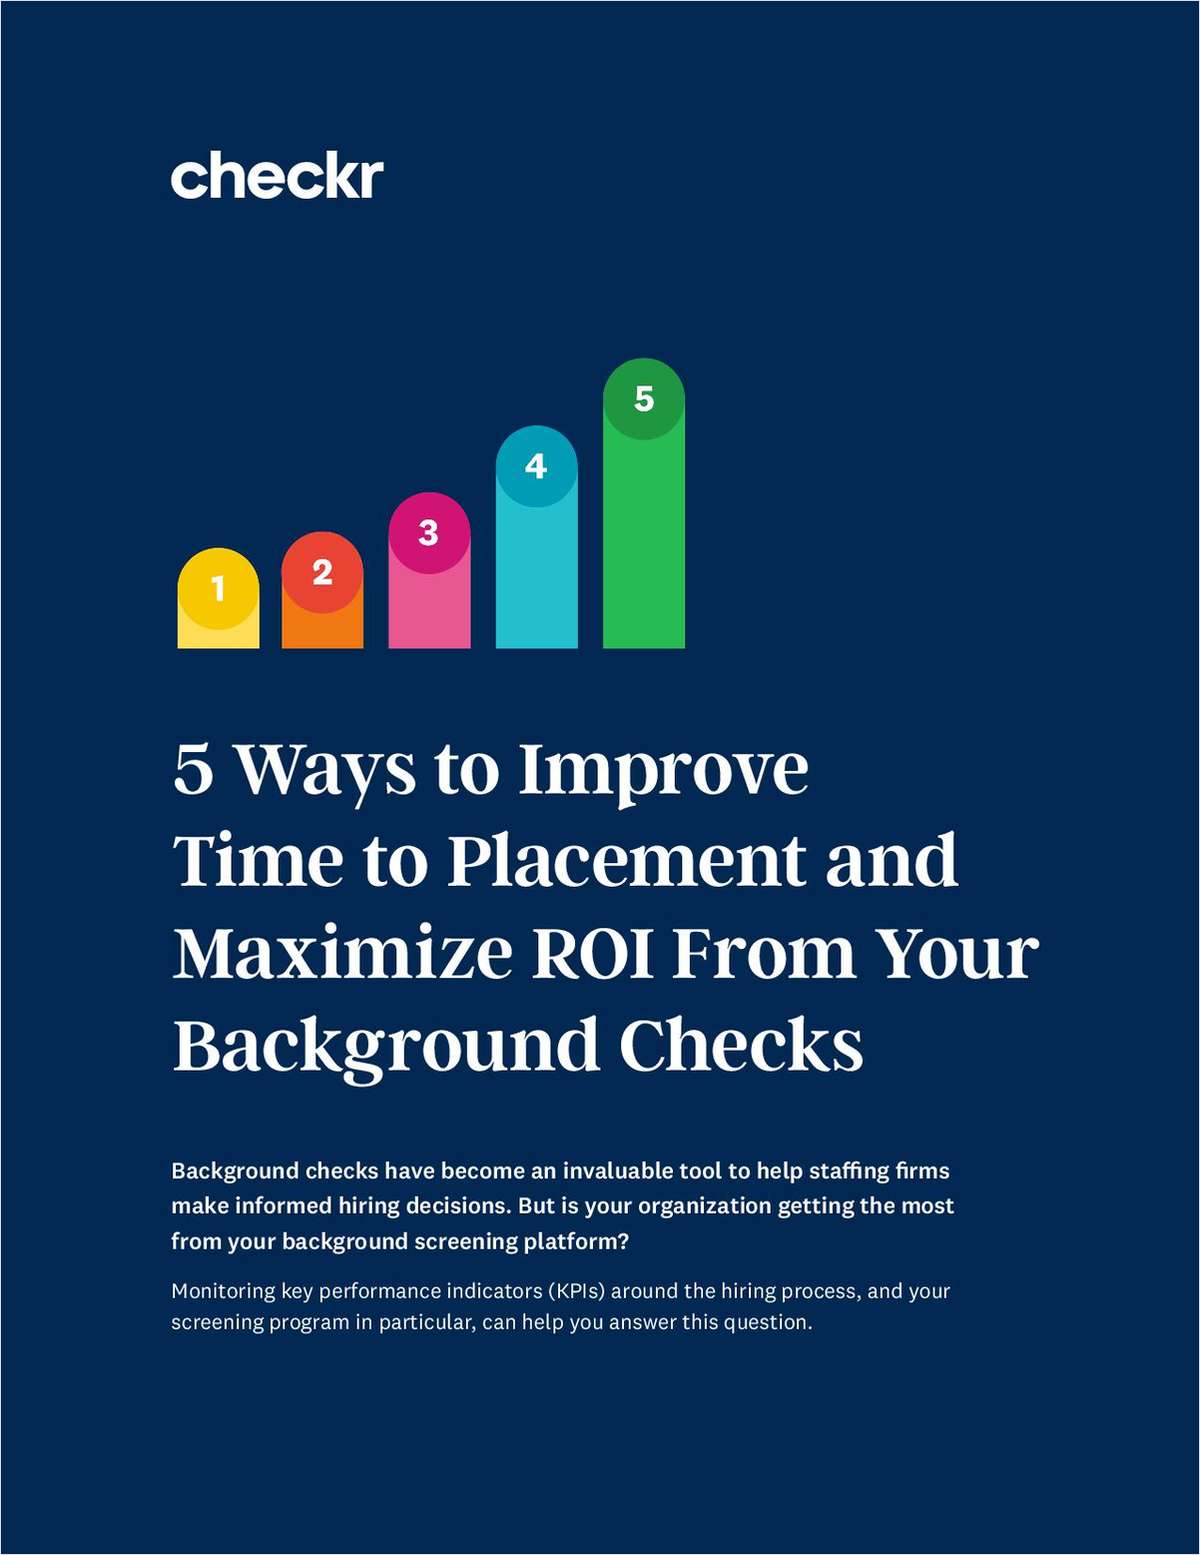 5 Ways to Improve Time to Placement and Maximize ROI From Your Background Checks